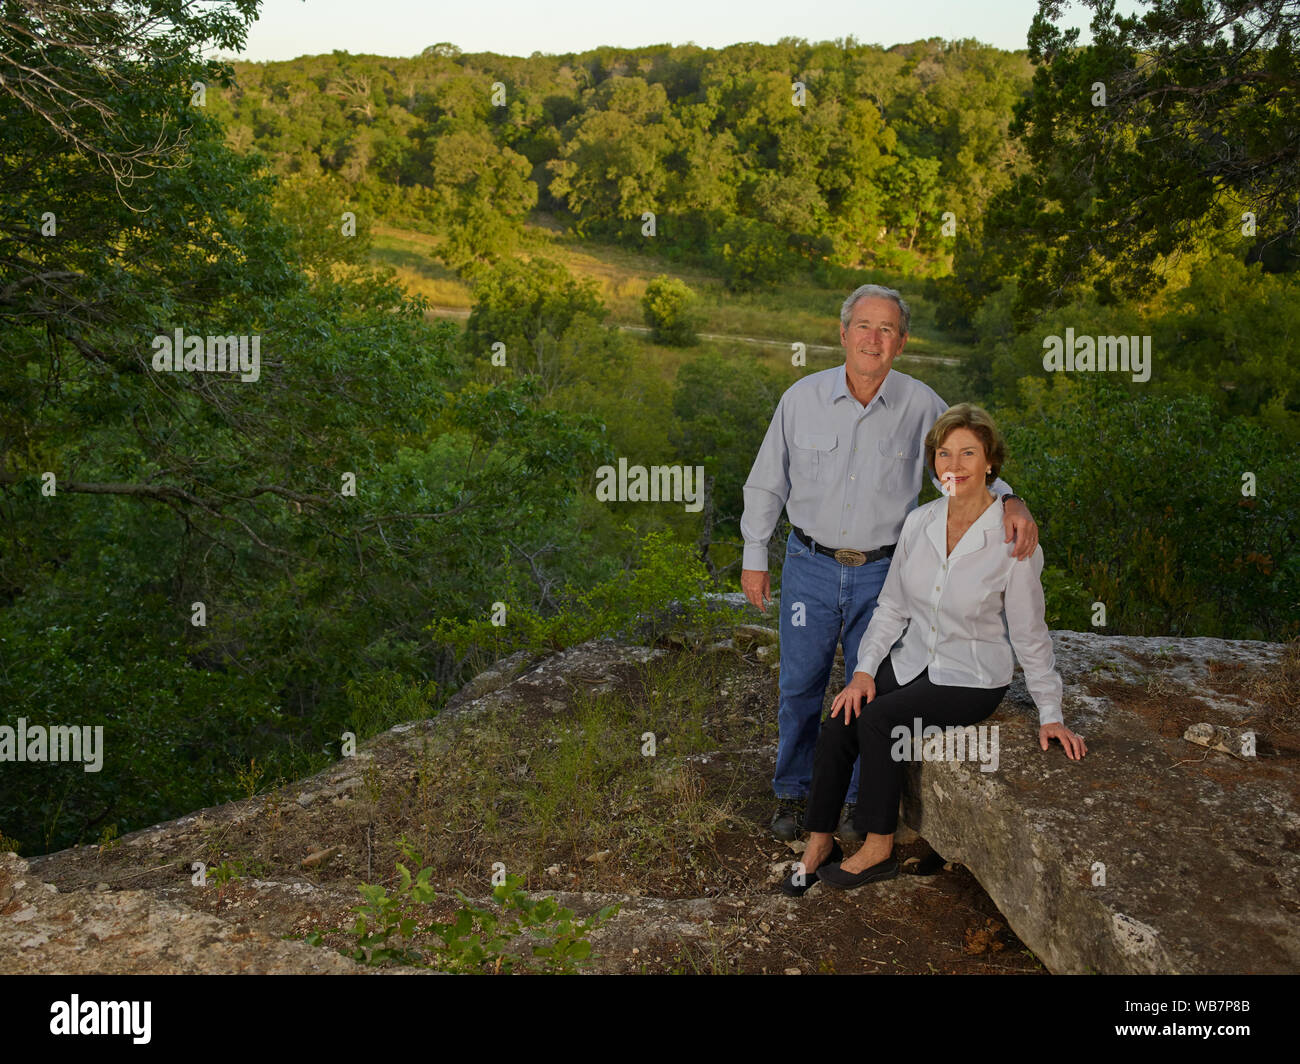 Former U.S. President George W. Bush and former first lady Laura Bush at one of their favorite overlooks on their 1,600-acre ranch near Crawford in McLennon County, Texas Stock Photo